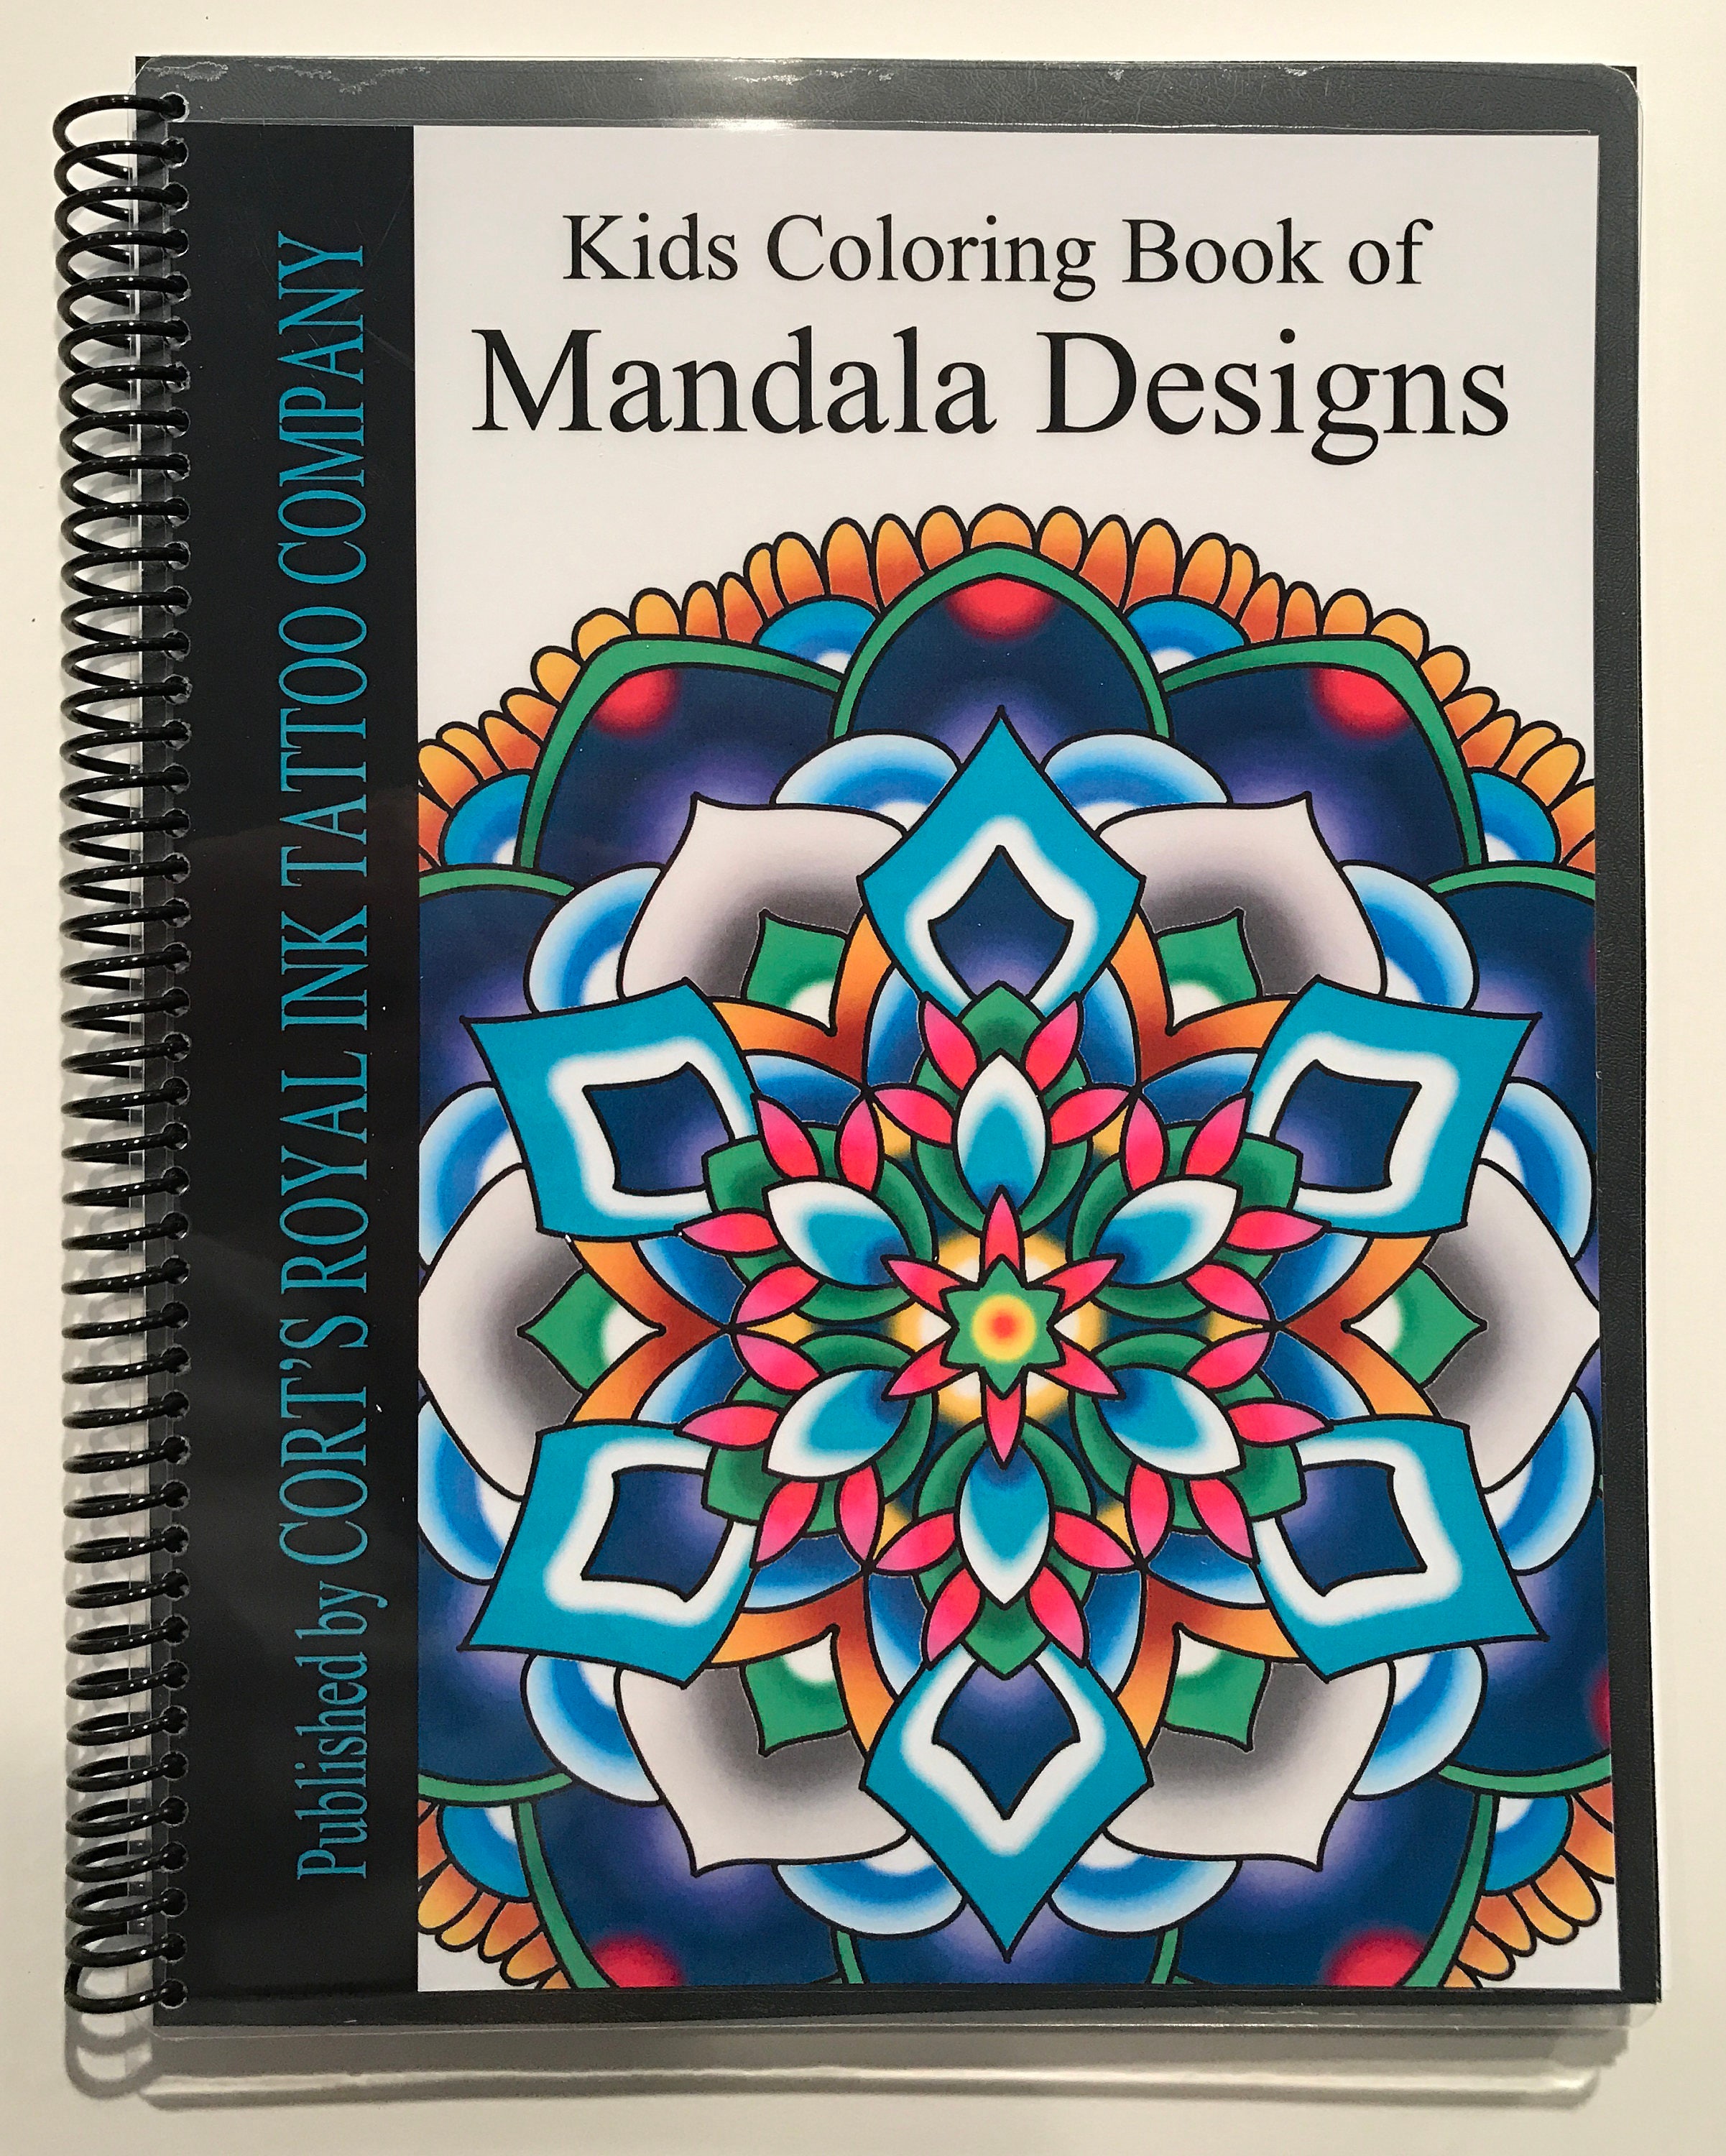 Harmony Adult Coloring Book, Coloring Book, Stress Relief, Hand Drawn,  Spiral Bound 